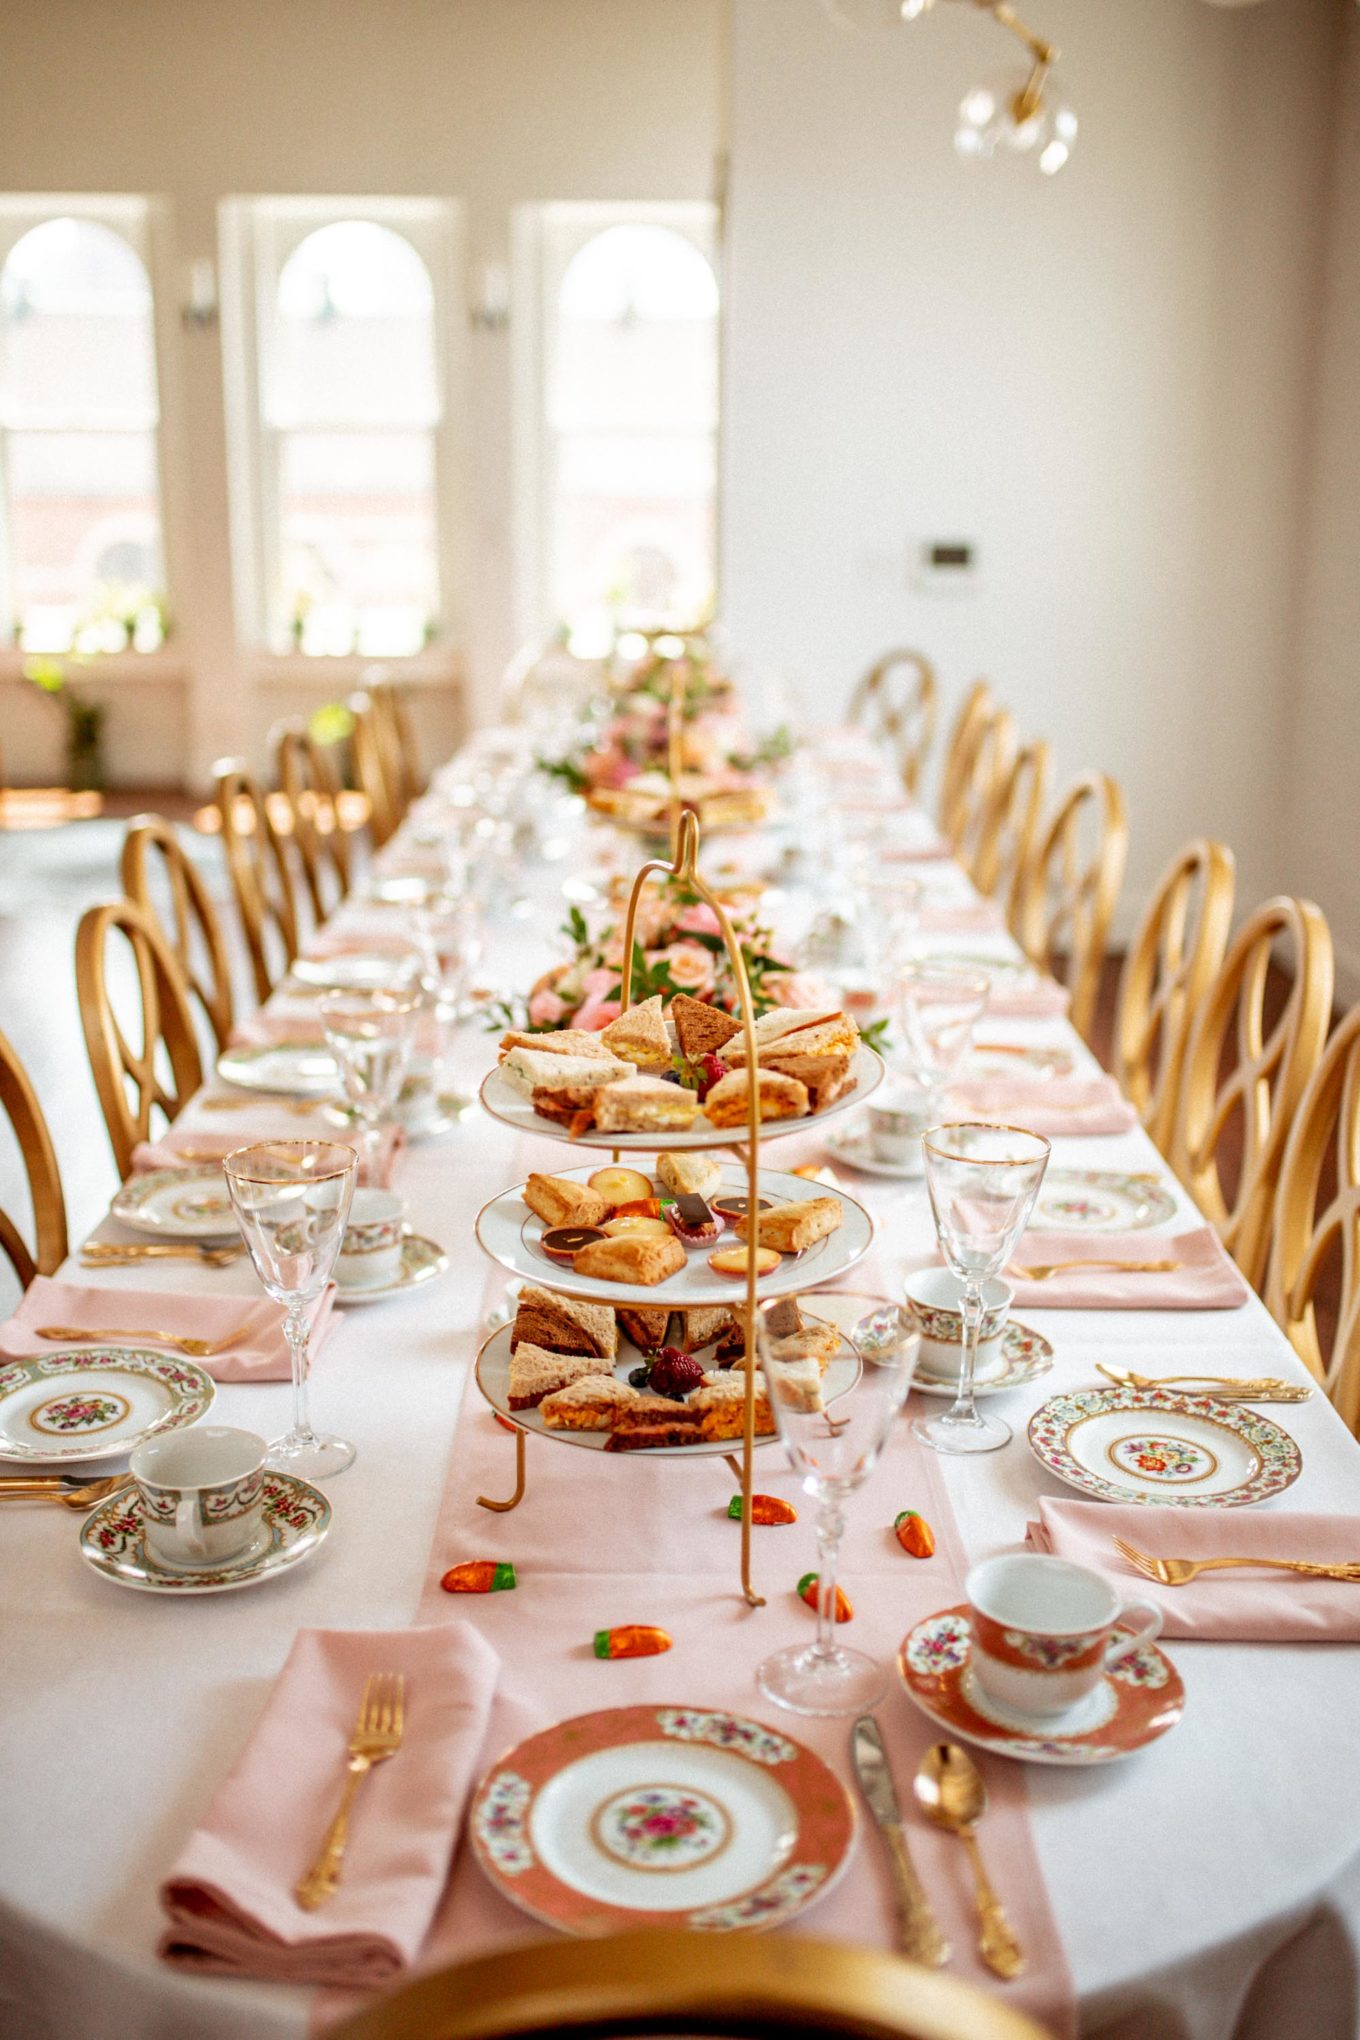 Tabletop Inspiration: A Beatrix Potter-Themed Baby Shower